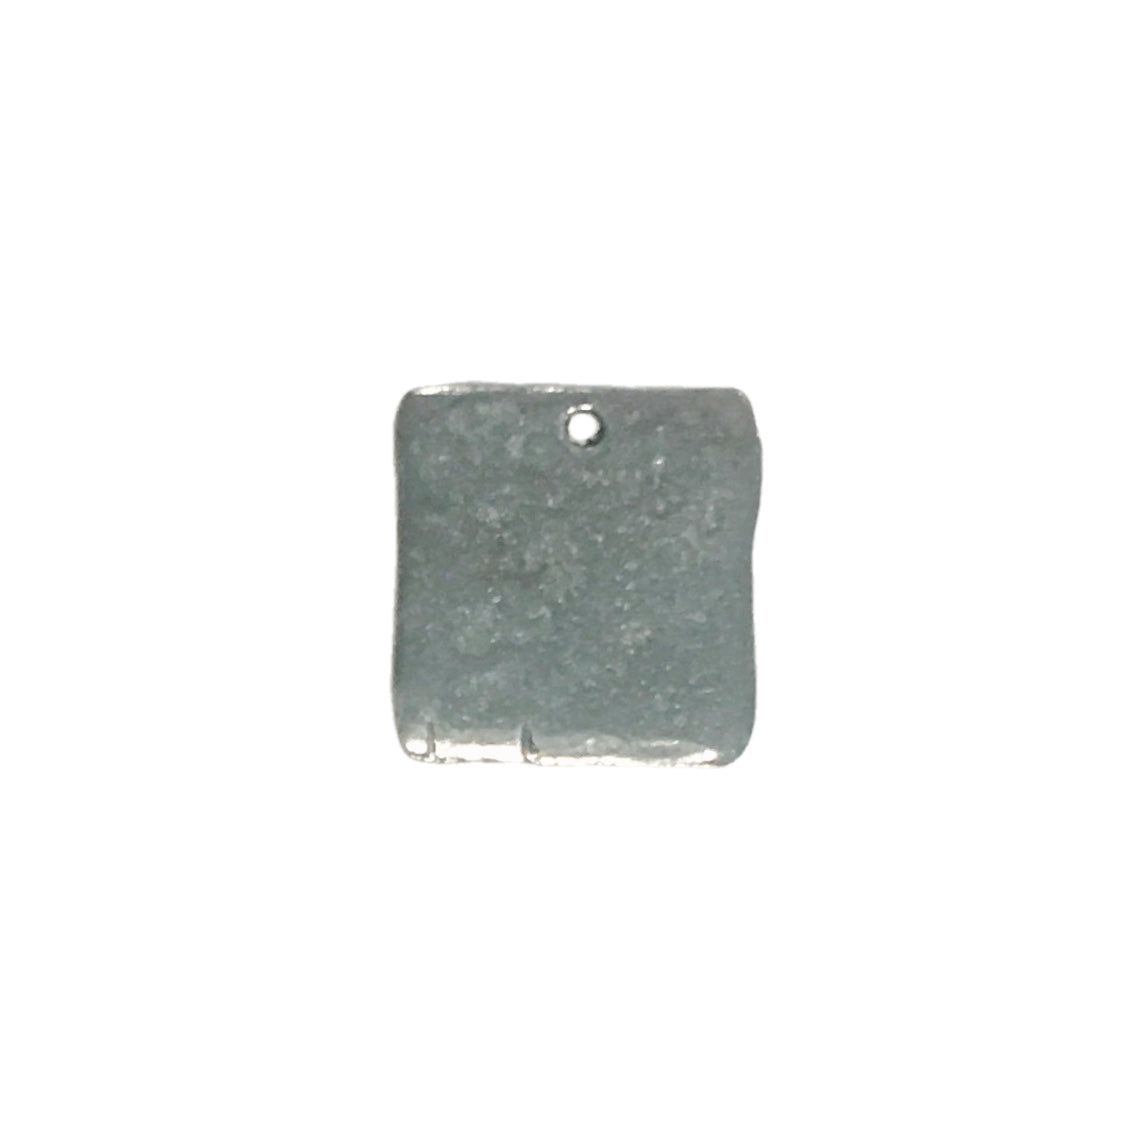 Hammered Square Tag Charms - Qty 5 - Lead Free Pewter Silver - American Made